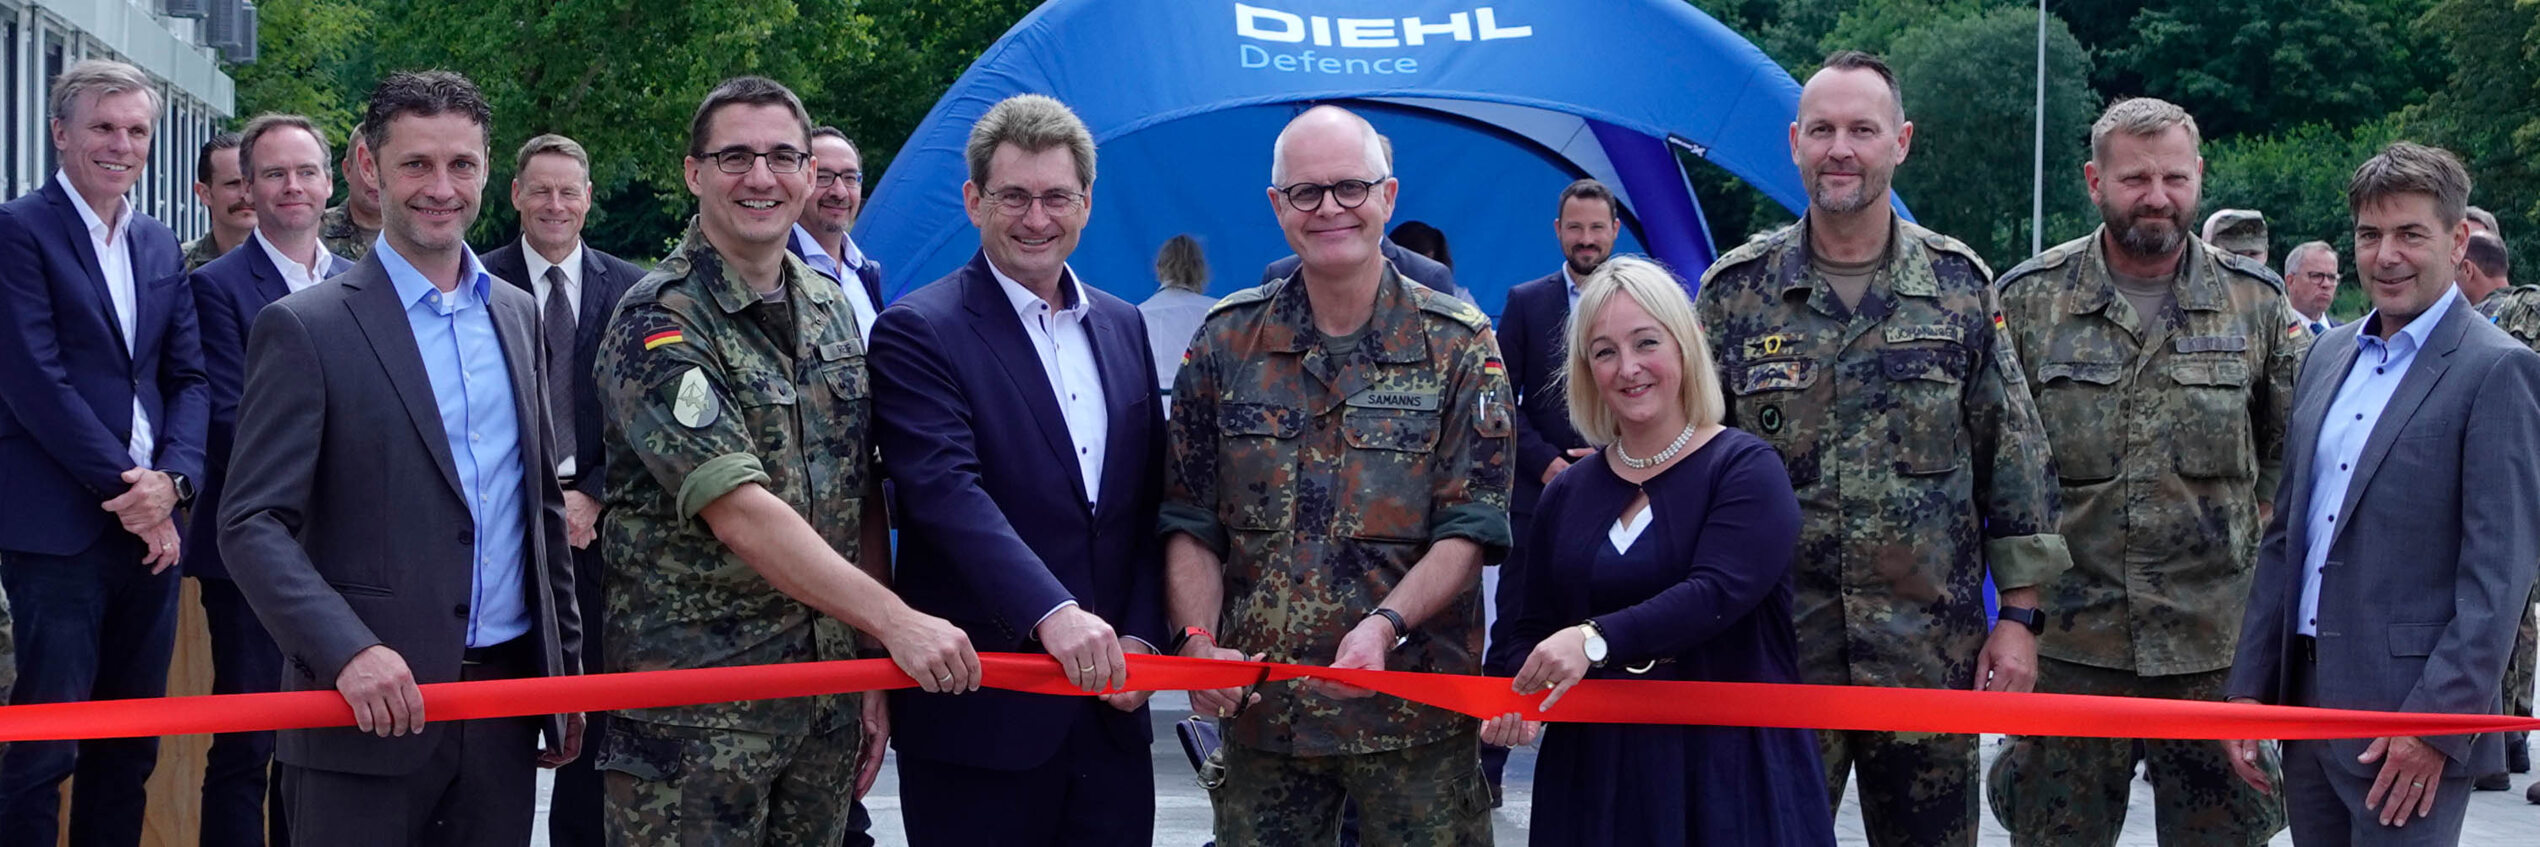 GERMAN AIR FORCE, GMSH AND DIEHL DEFENCE INAUGURATE THE GROUND-BASED AIR DEFENCE TRAINING FACILITY